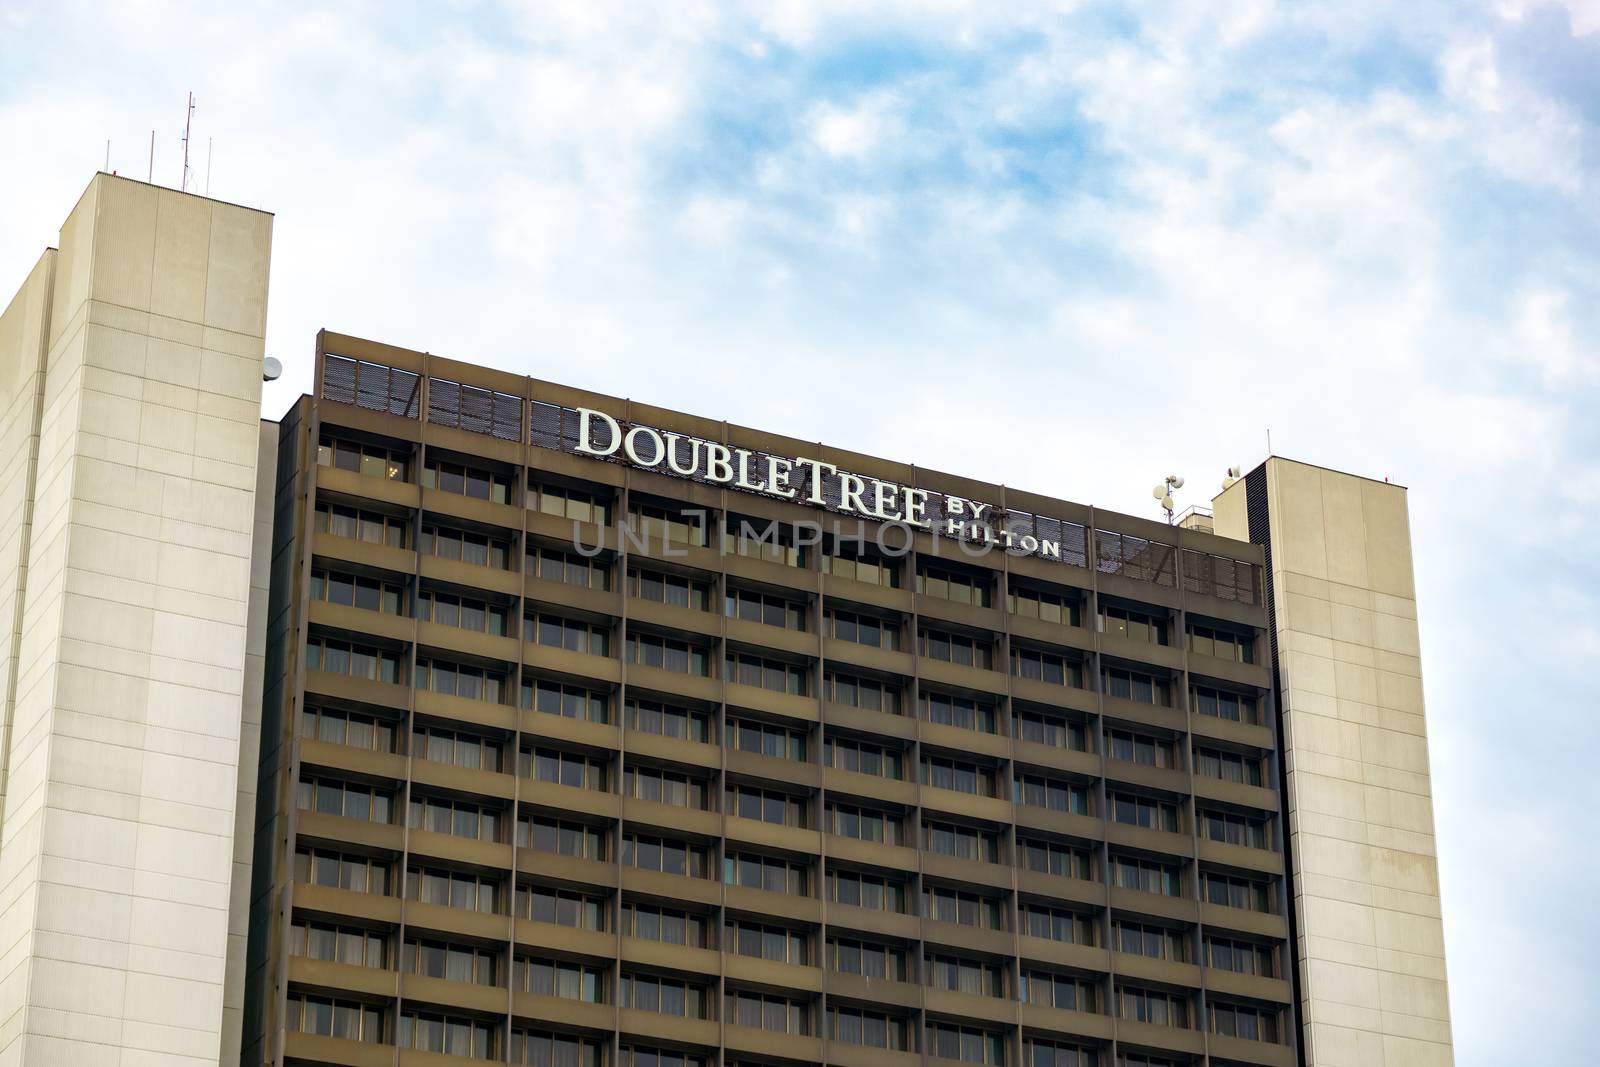 BLOOMINGTON, MN/USA - August 13, 2015: Double Tree by Hilton hotel exterior. Hilton is an international chain of full service hotels and resorts and the flagship brand of Hilton Worldwide.